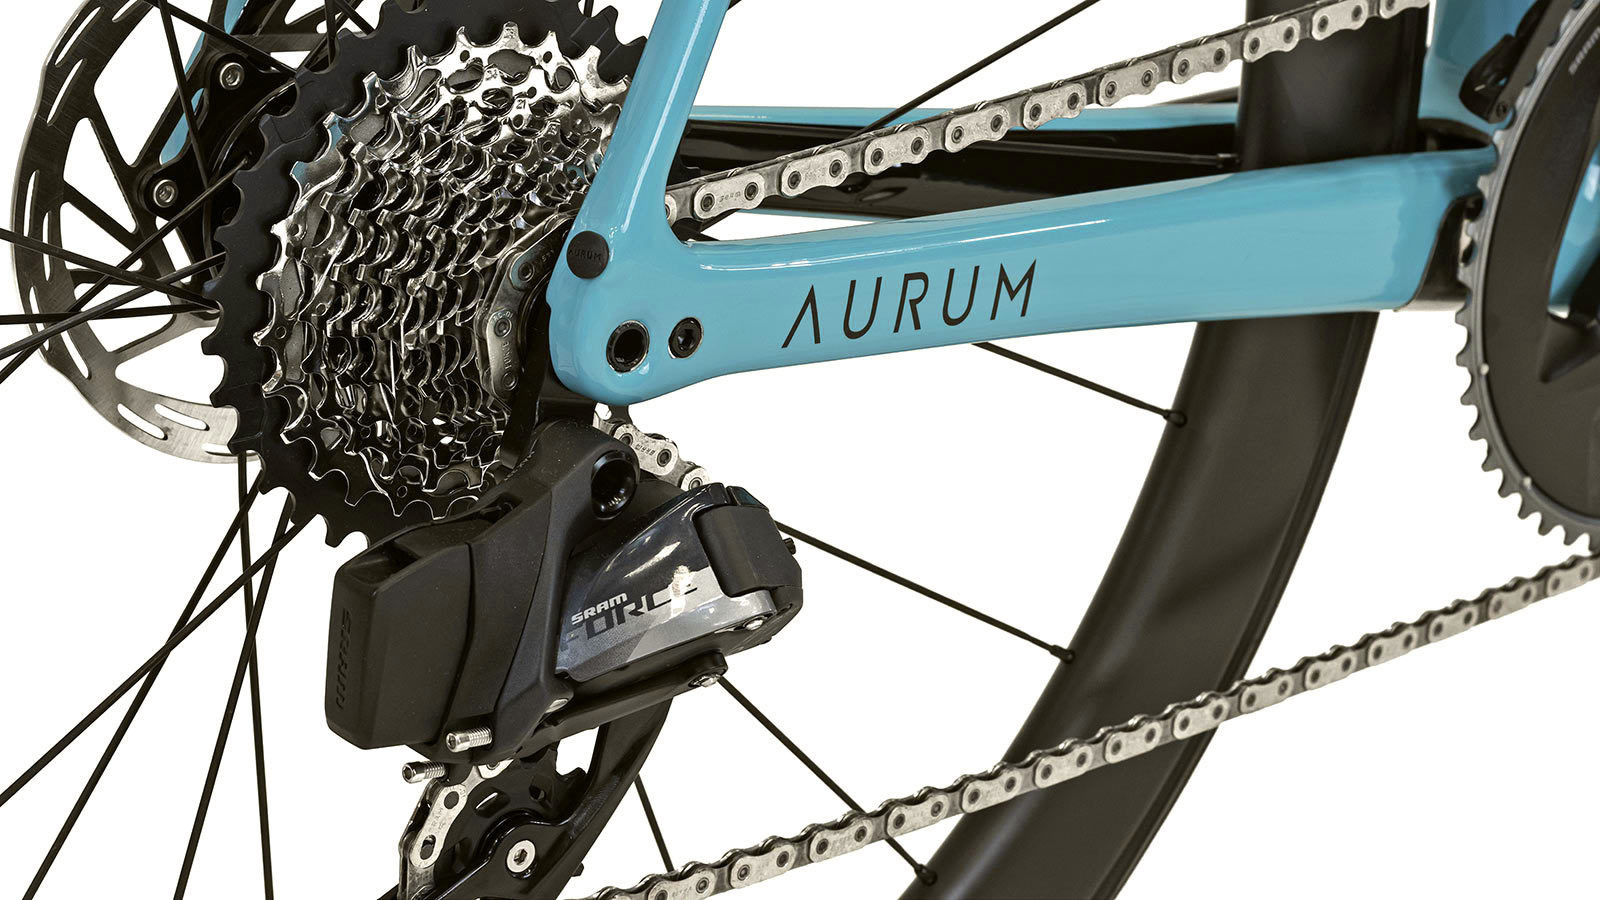 Aurum Magma Essentia more affordable all-rounder carbon road bike, updated dropout